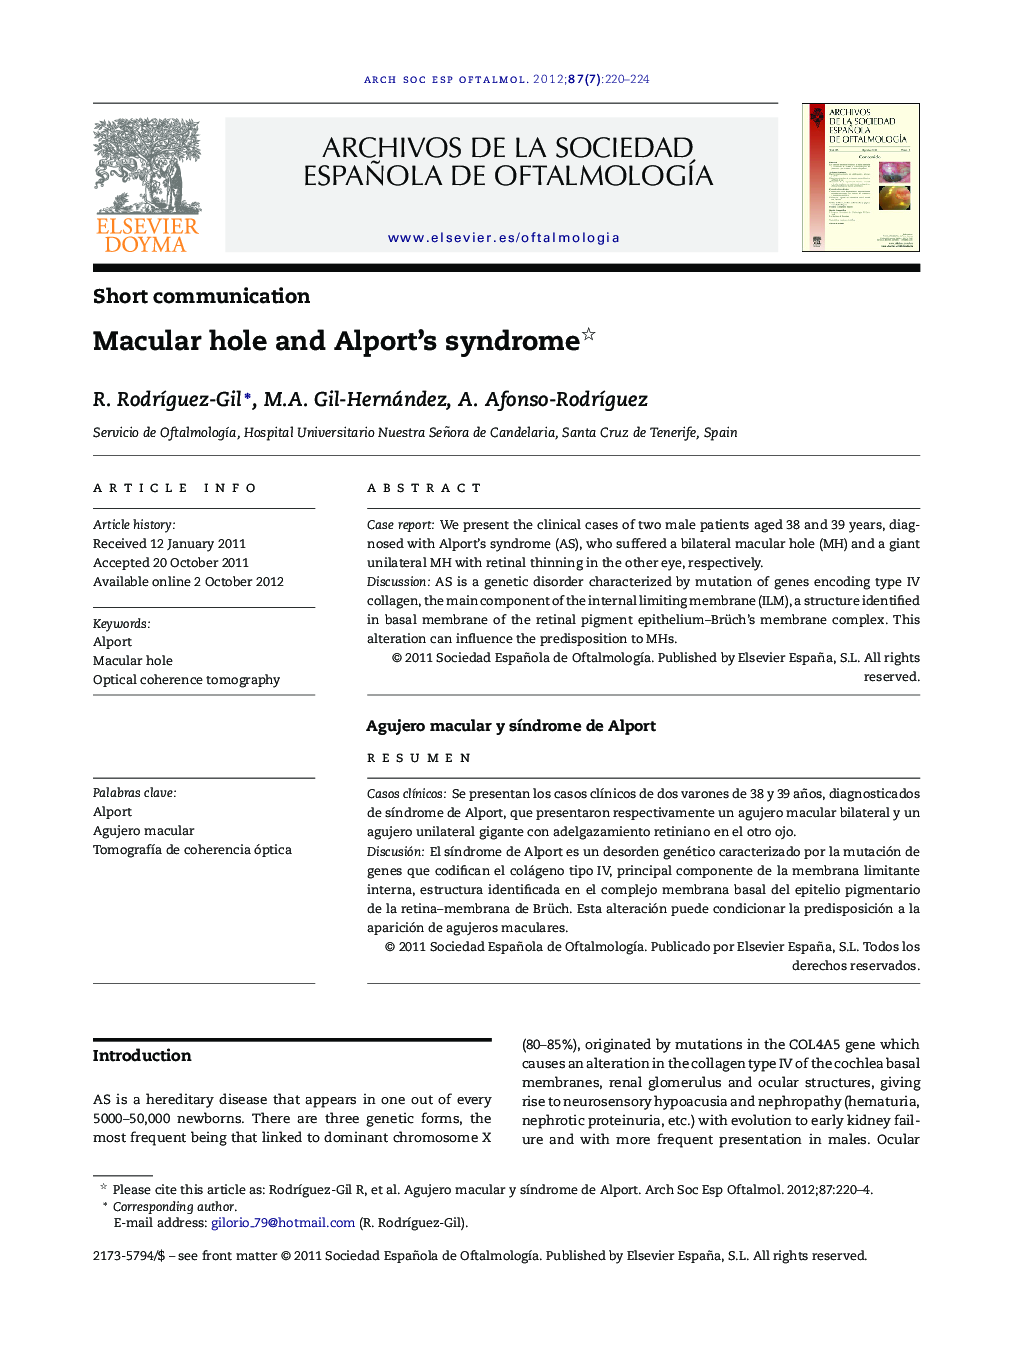 Macular hole and Alport's syndrome 